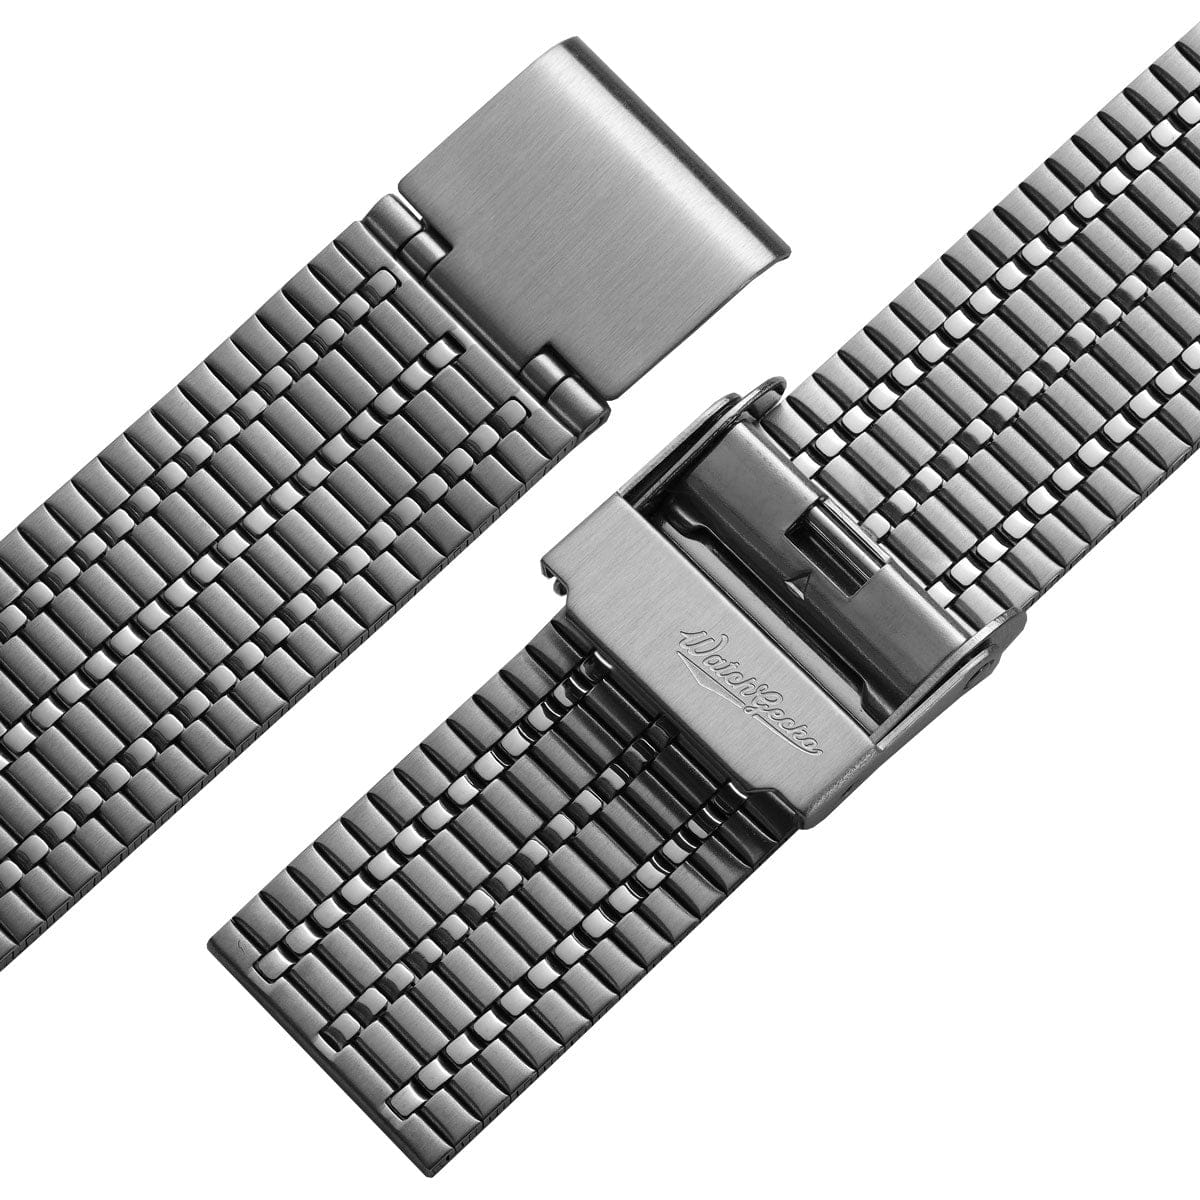 WatchGecko Classic Retro Stainless Steel Watch Strap - Brushed And Polished